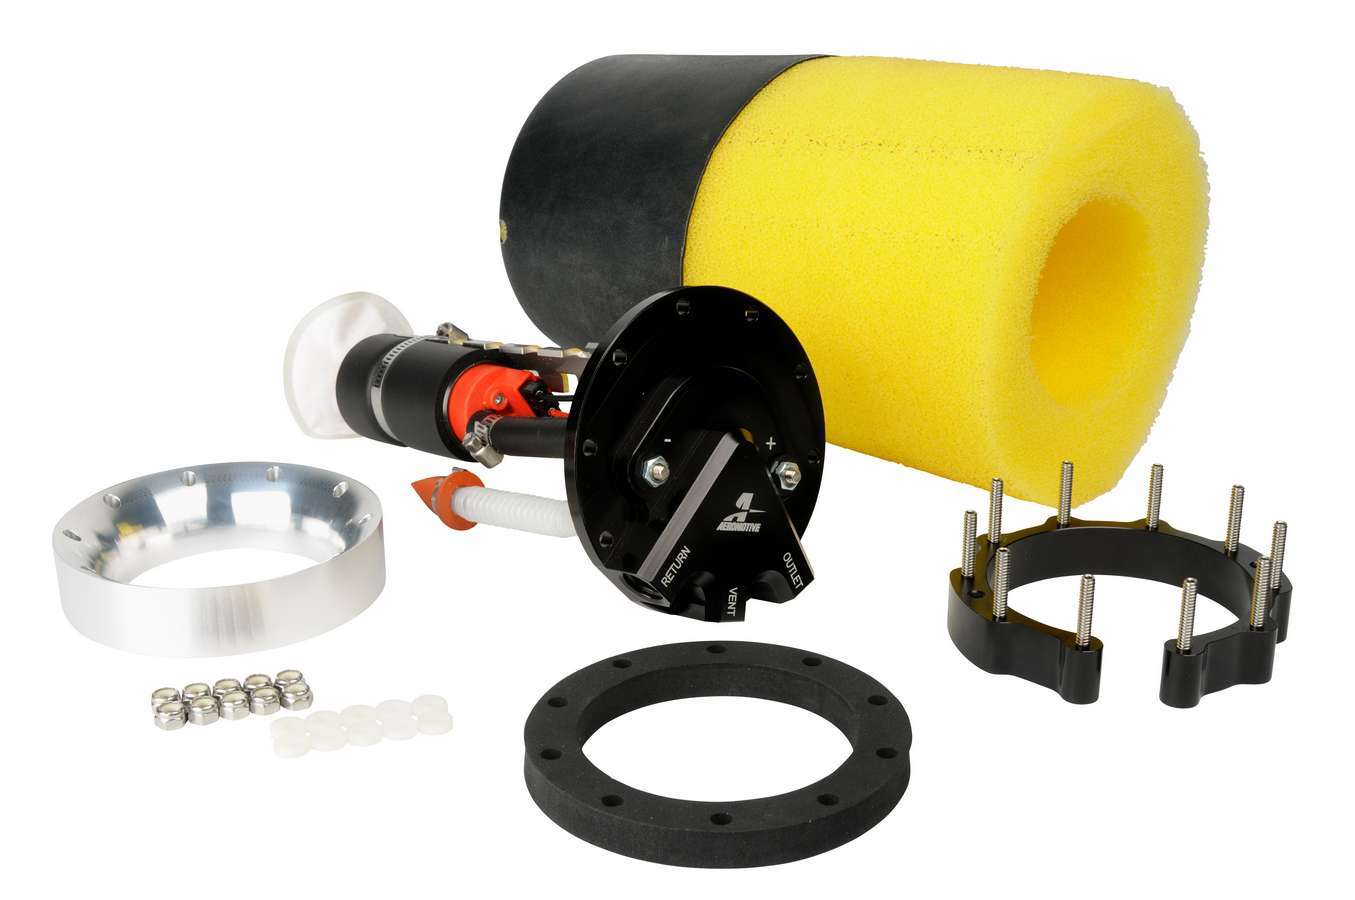 Phantom 340 Stealth Fuel Pump System, Electric, In-Tank, 340 lph at 45 psi, 6an Outlet/Return/Vent for C6 Corvette